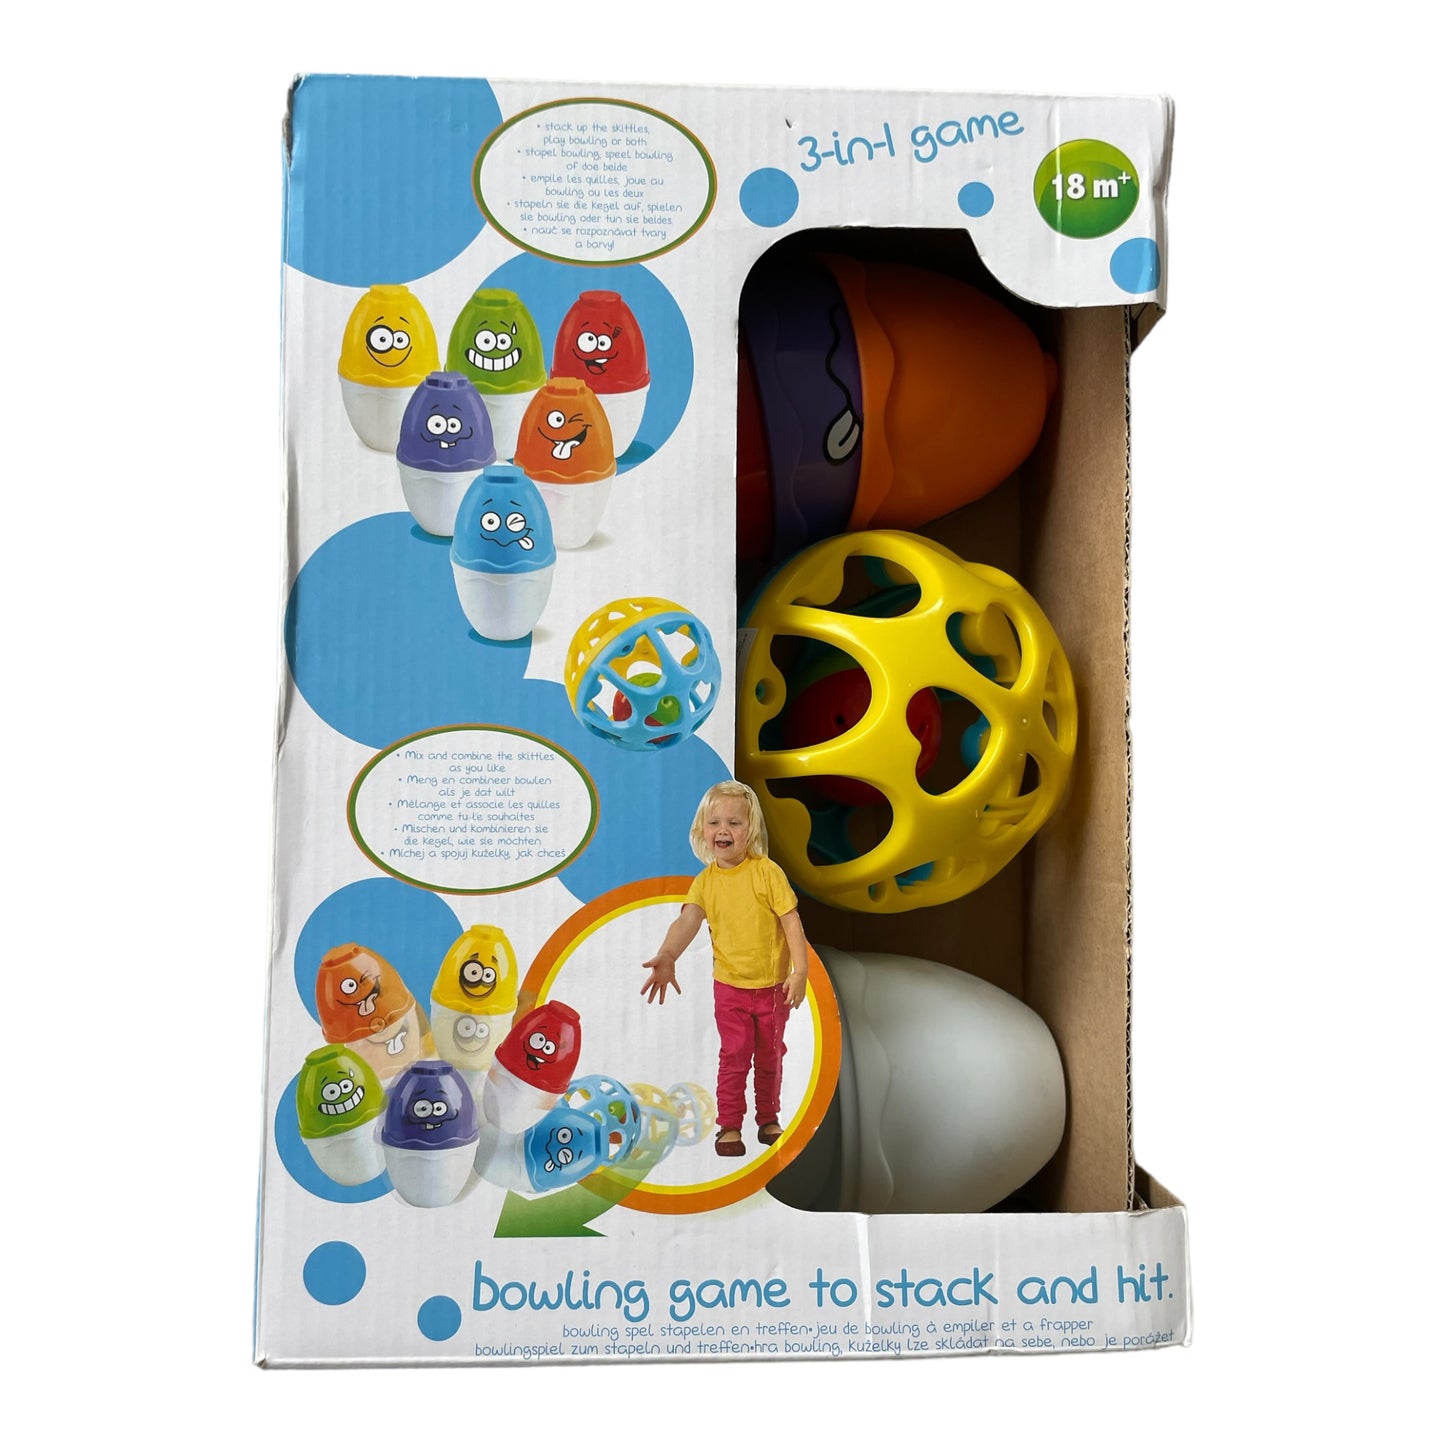 3 in 1 Game - PlayGo Funny Face Stacker Sorting & Stacking & Bowling Game for Babies.